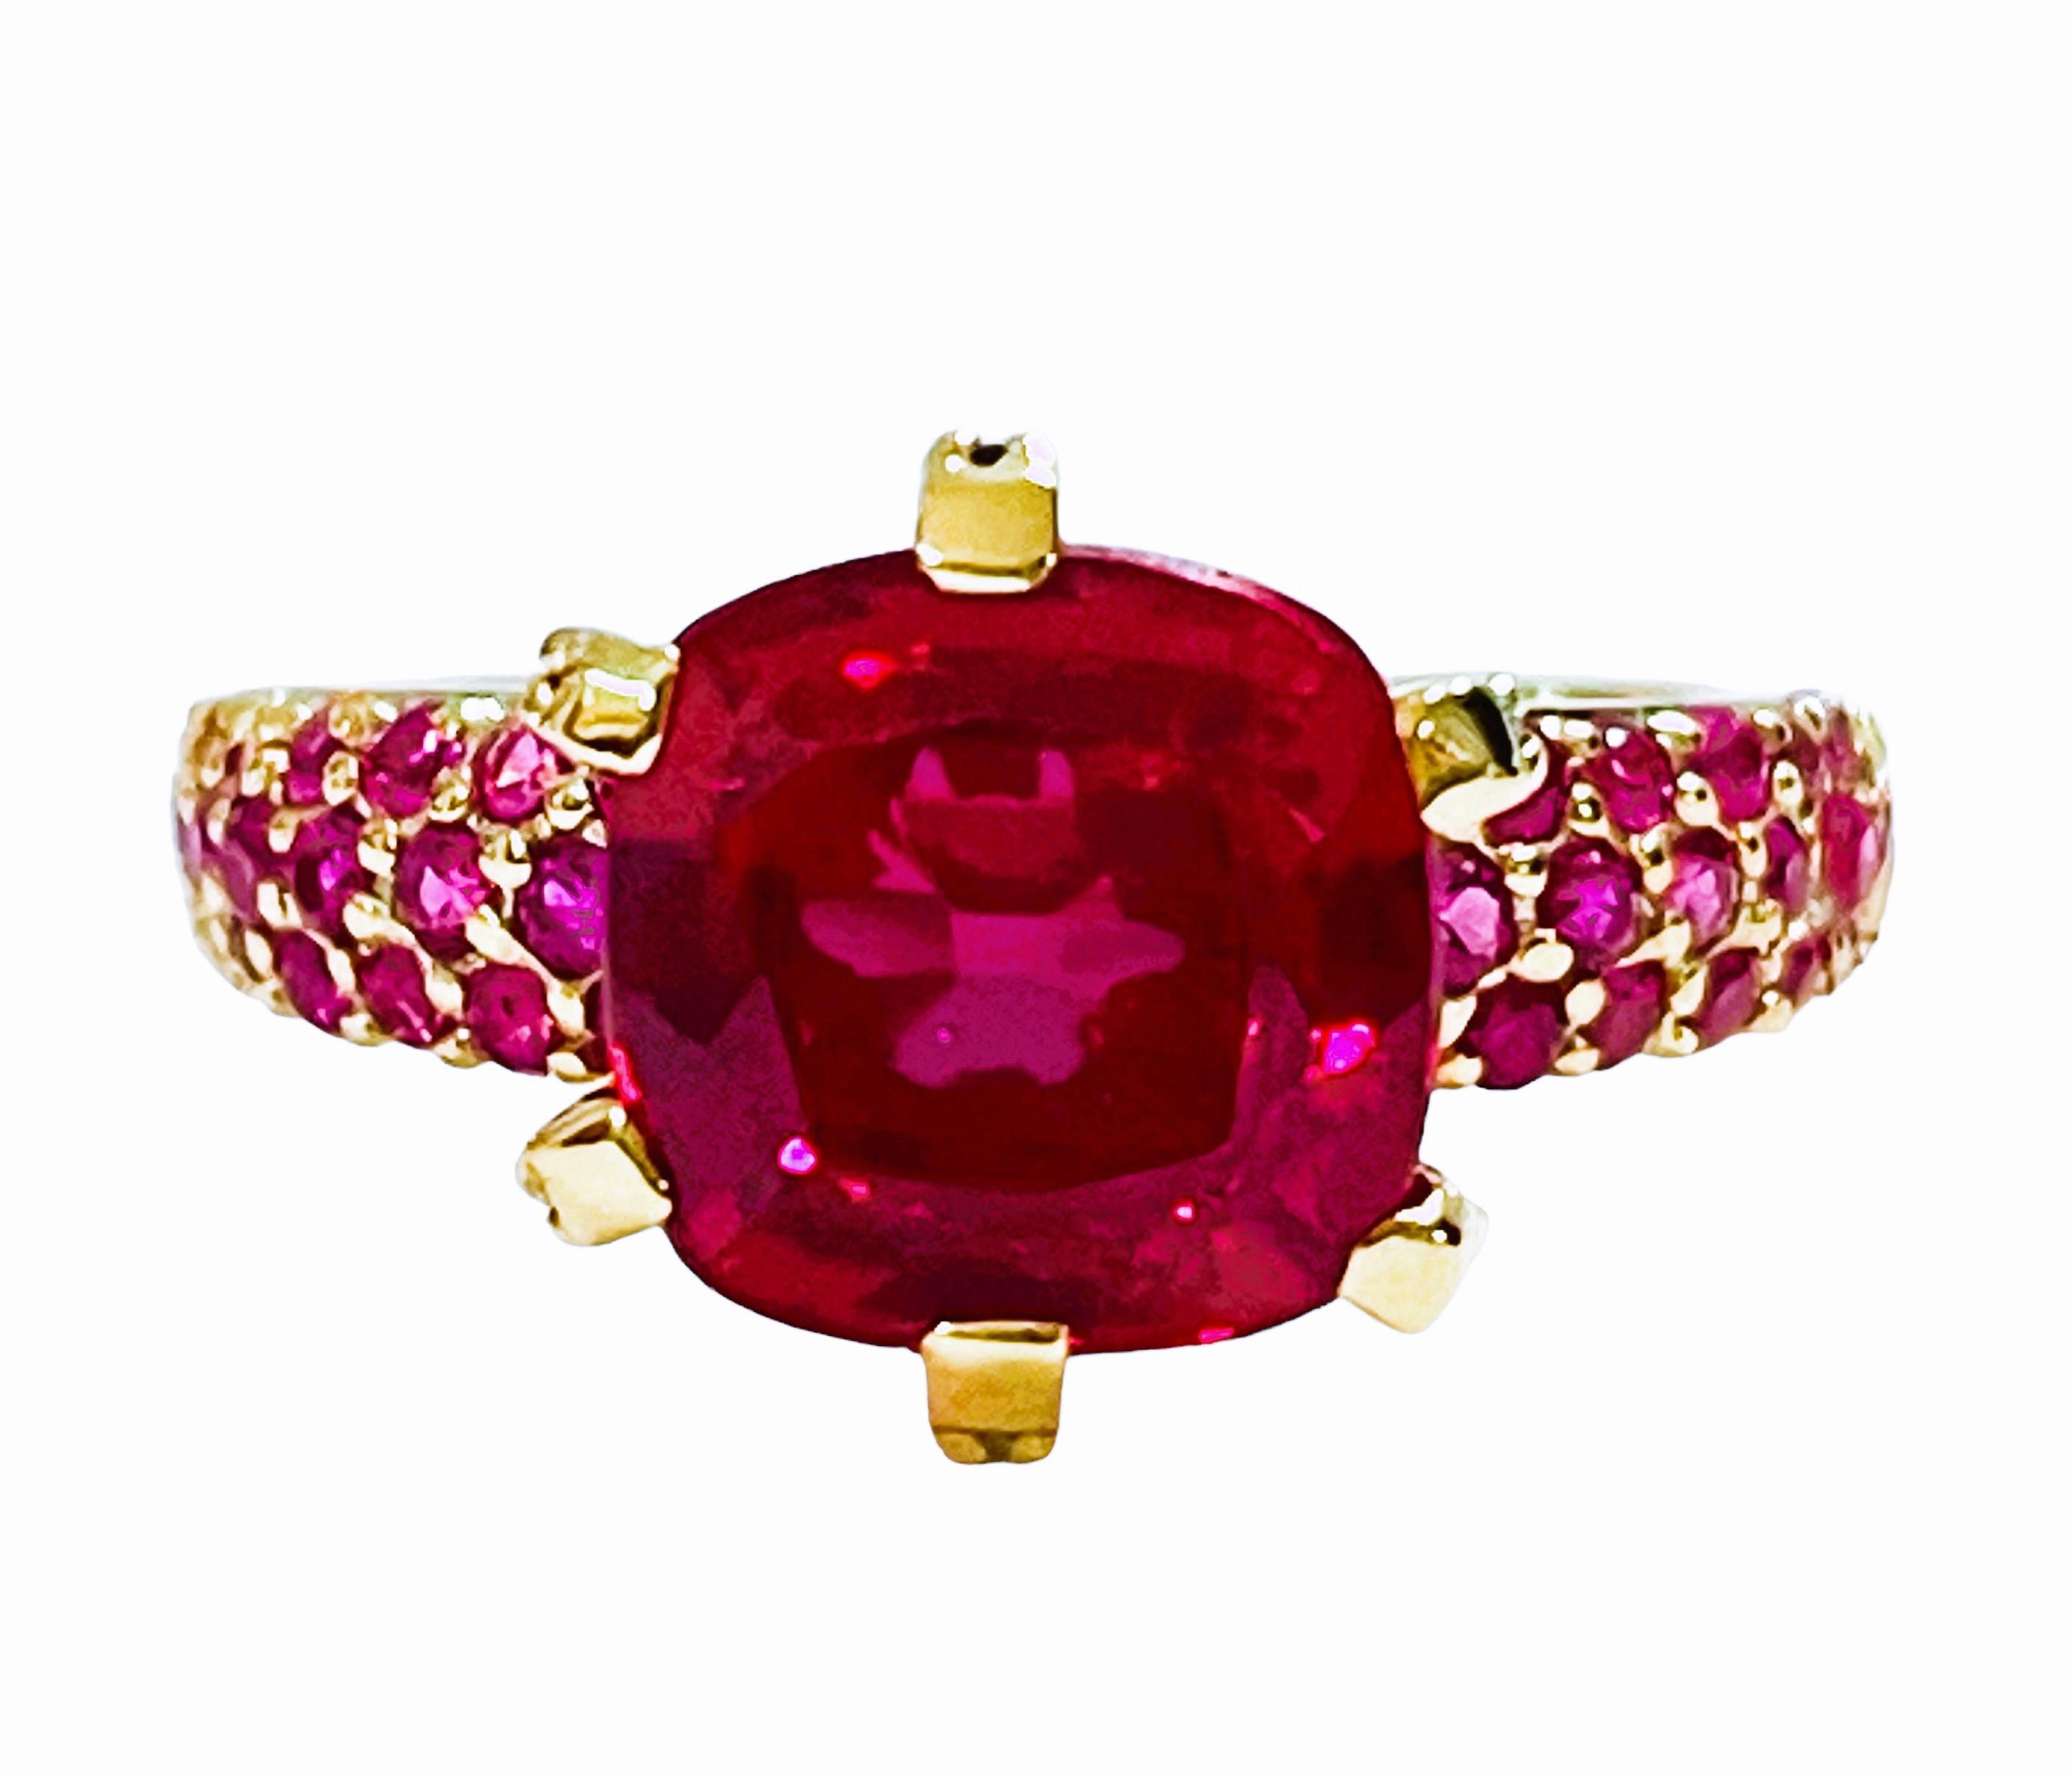 This ring is just  beautiful! The ring is a size 7.  The Tourmaline stone was mined in Africa and is exceptional. The 